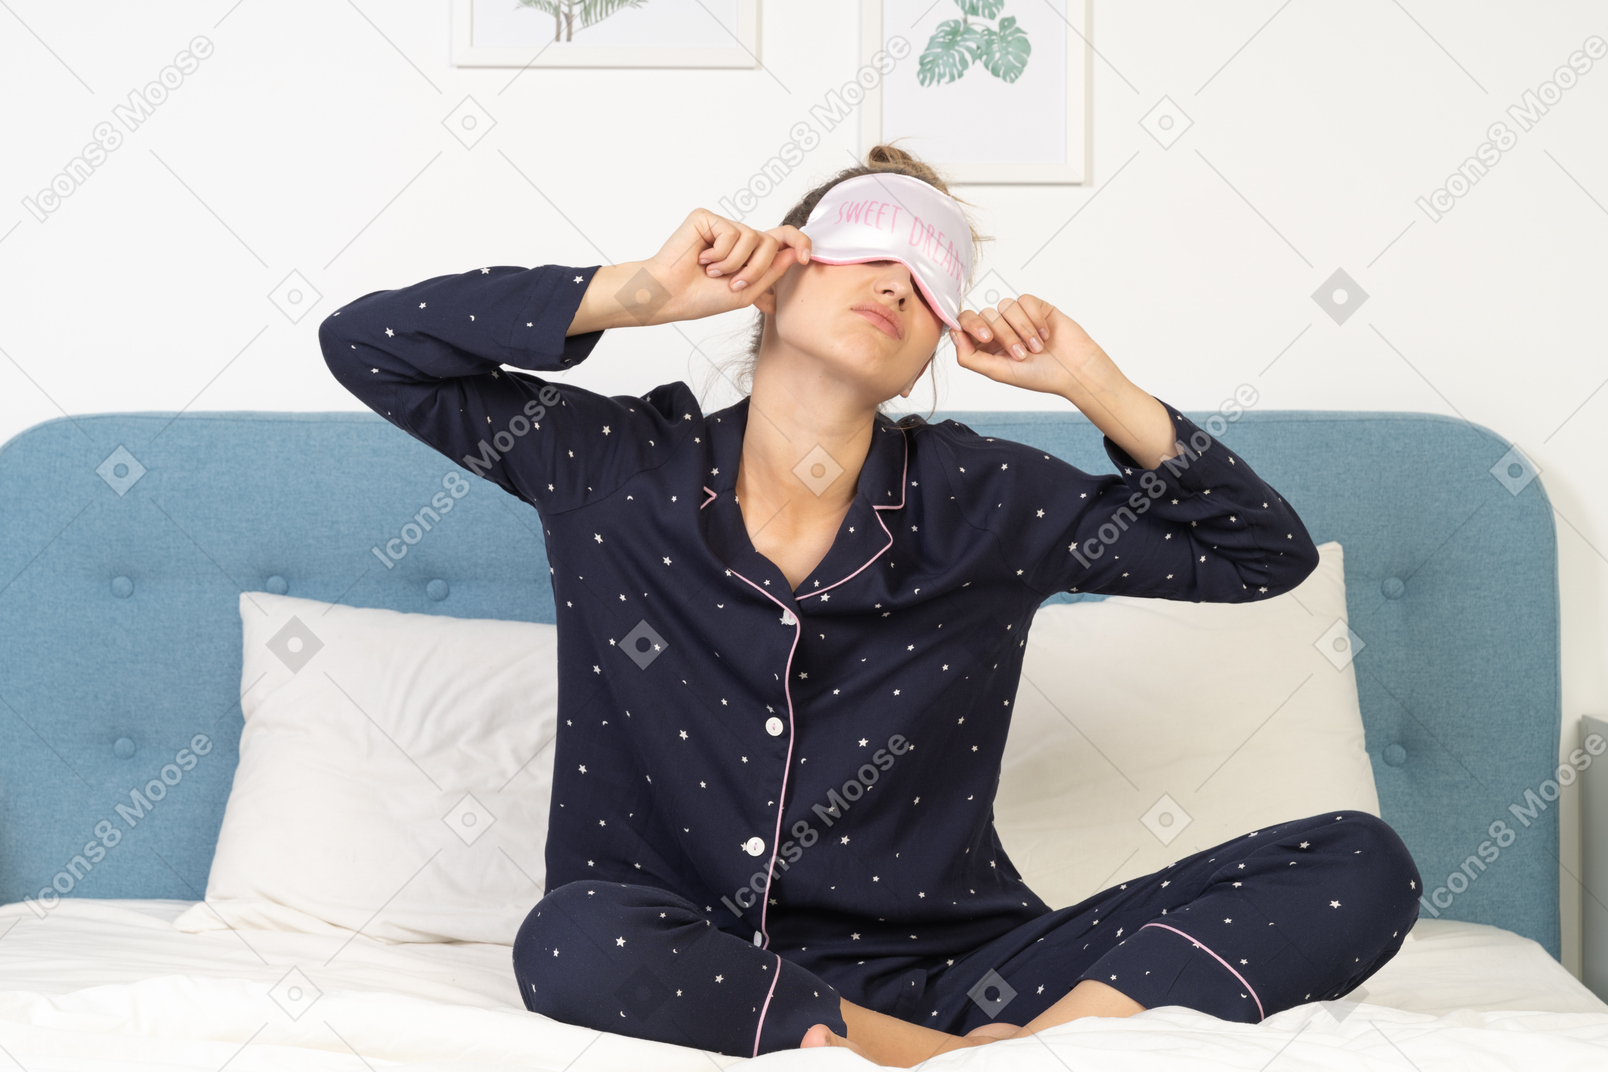 Front view of a young lady in pajamas putting on sleeping mask